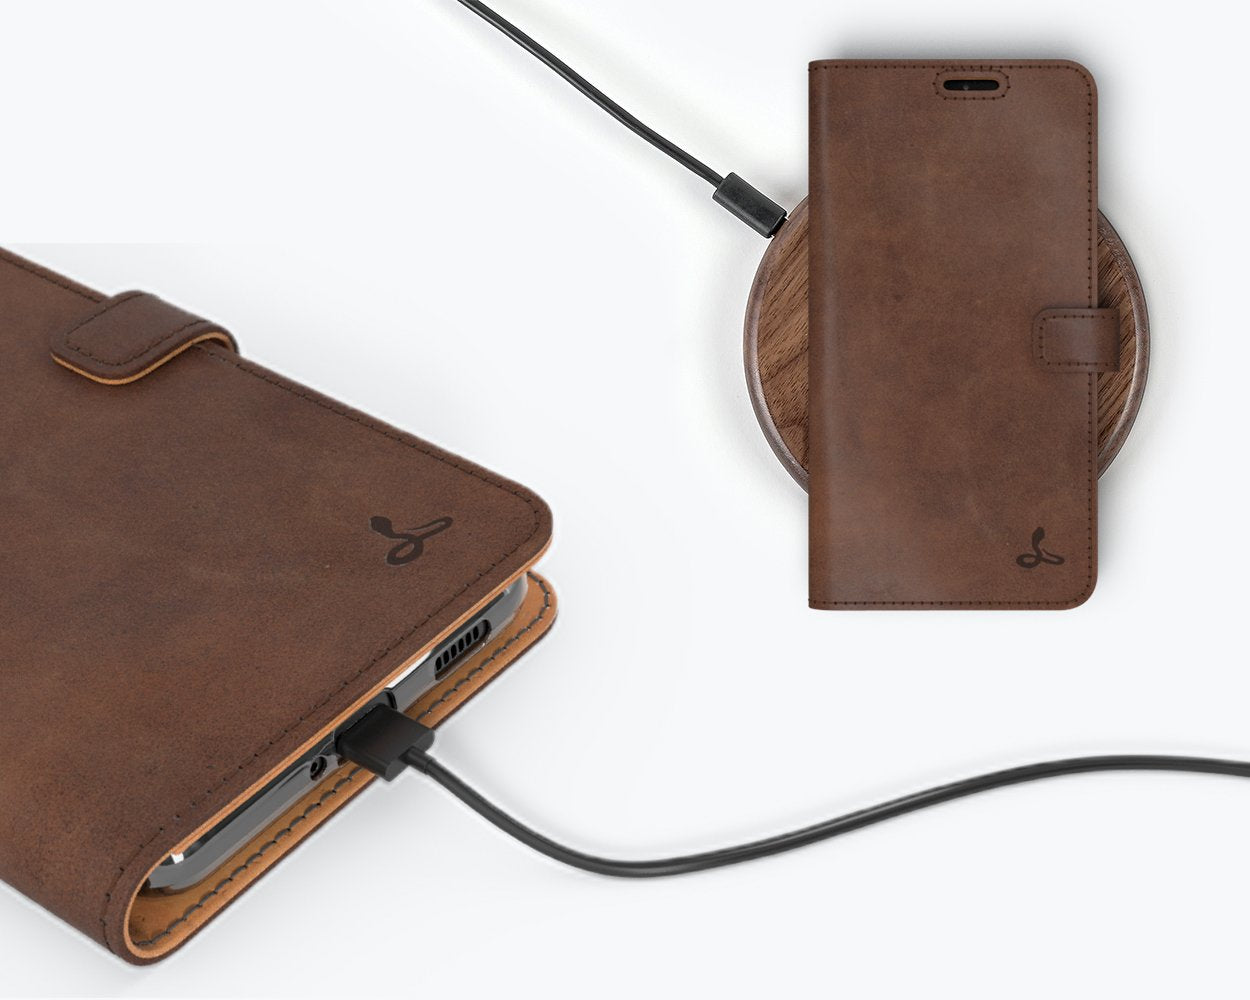 Vintage Leather Wallet - Samsung Galaxy S21 Ultra